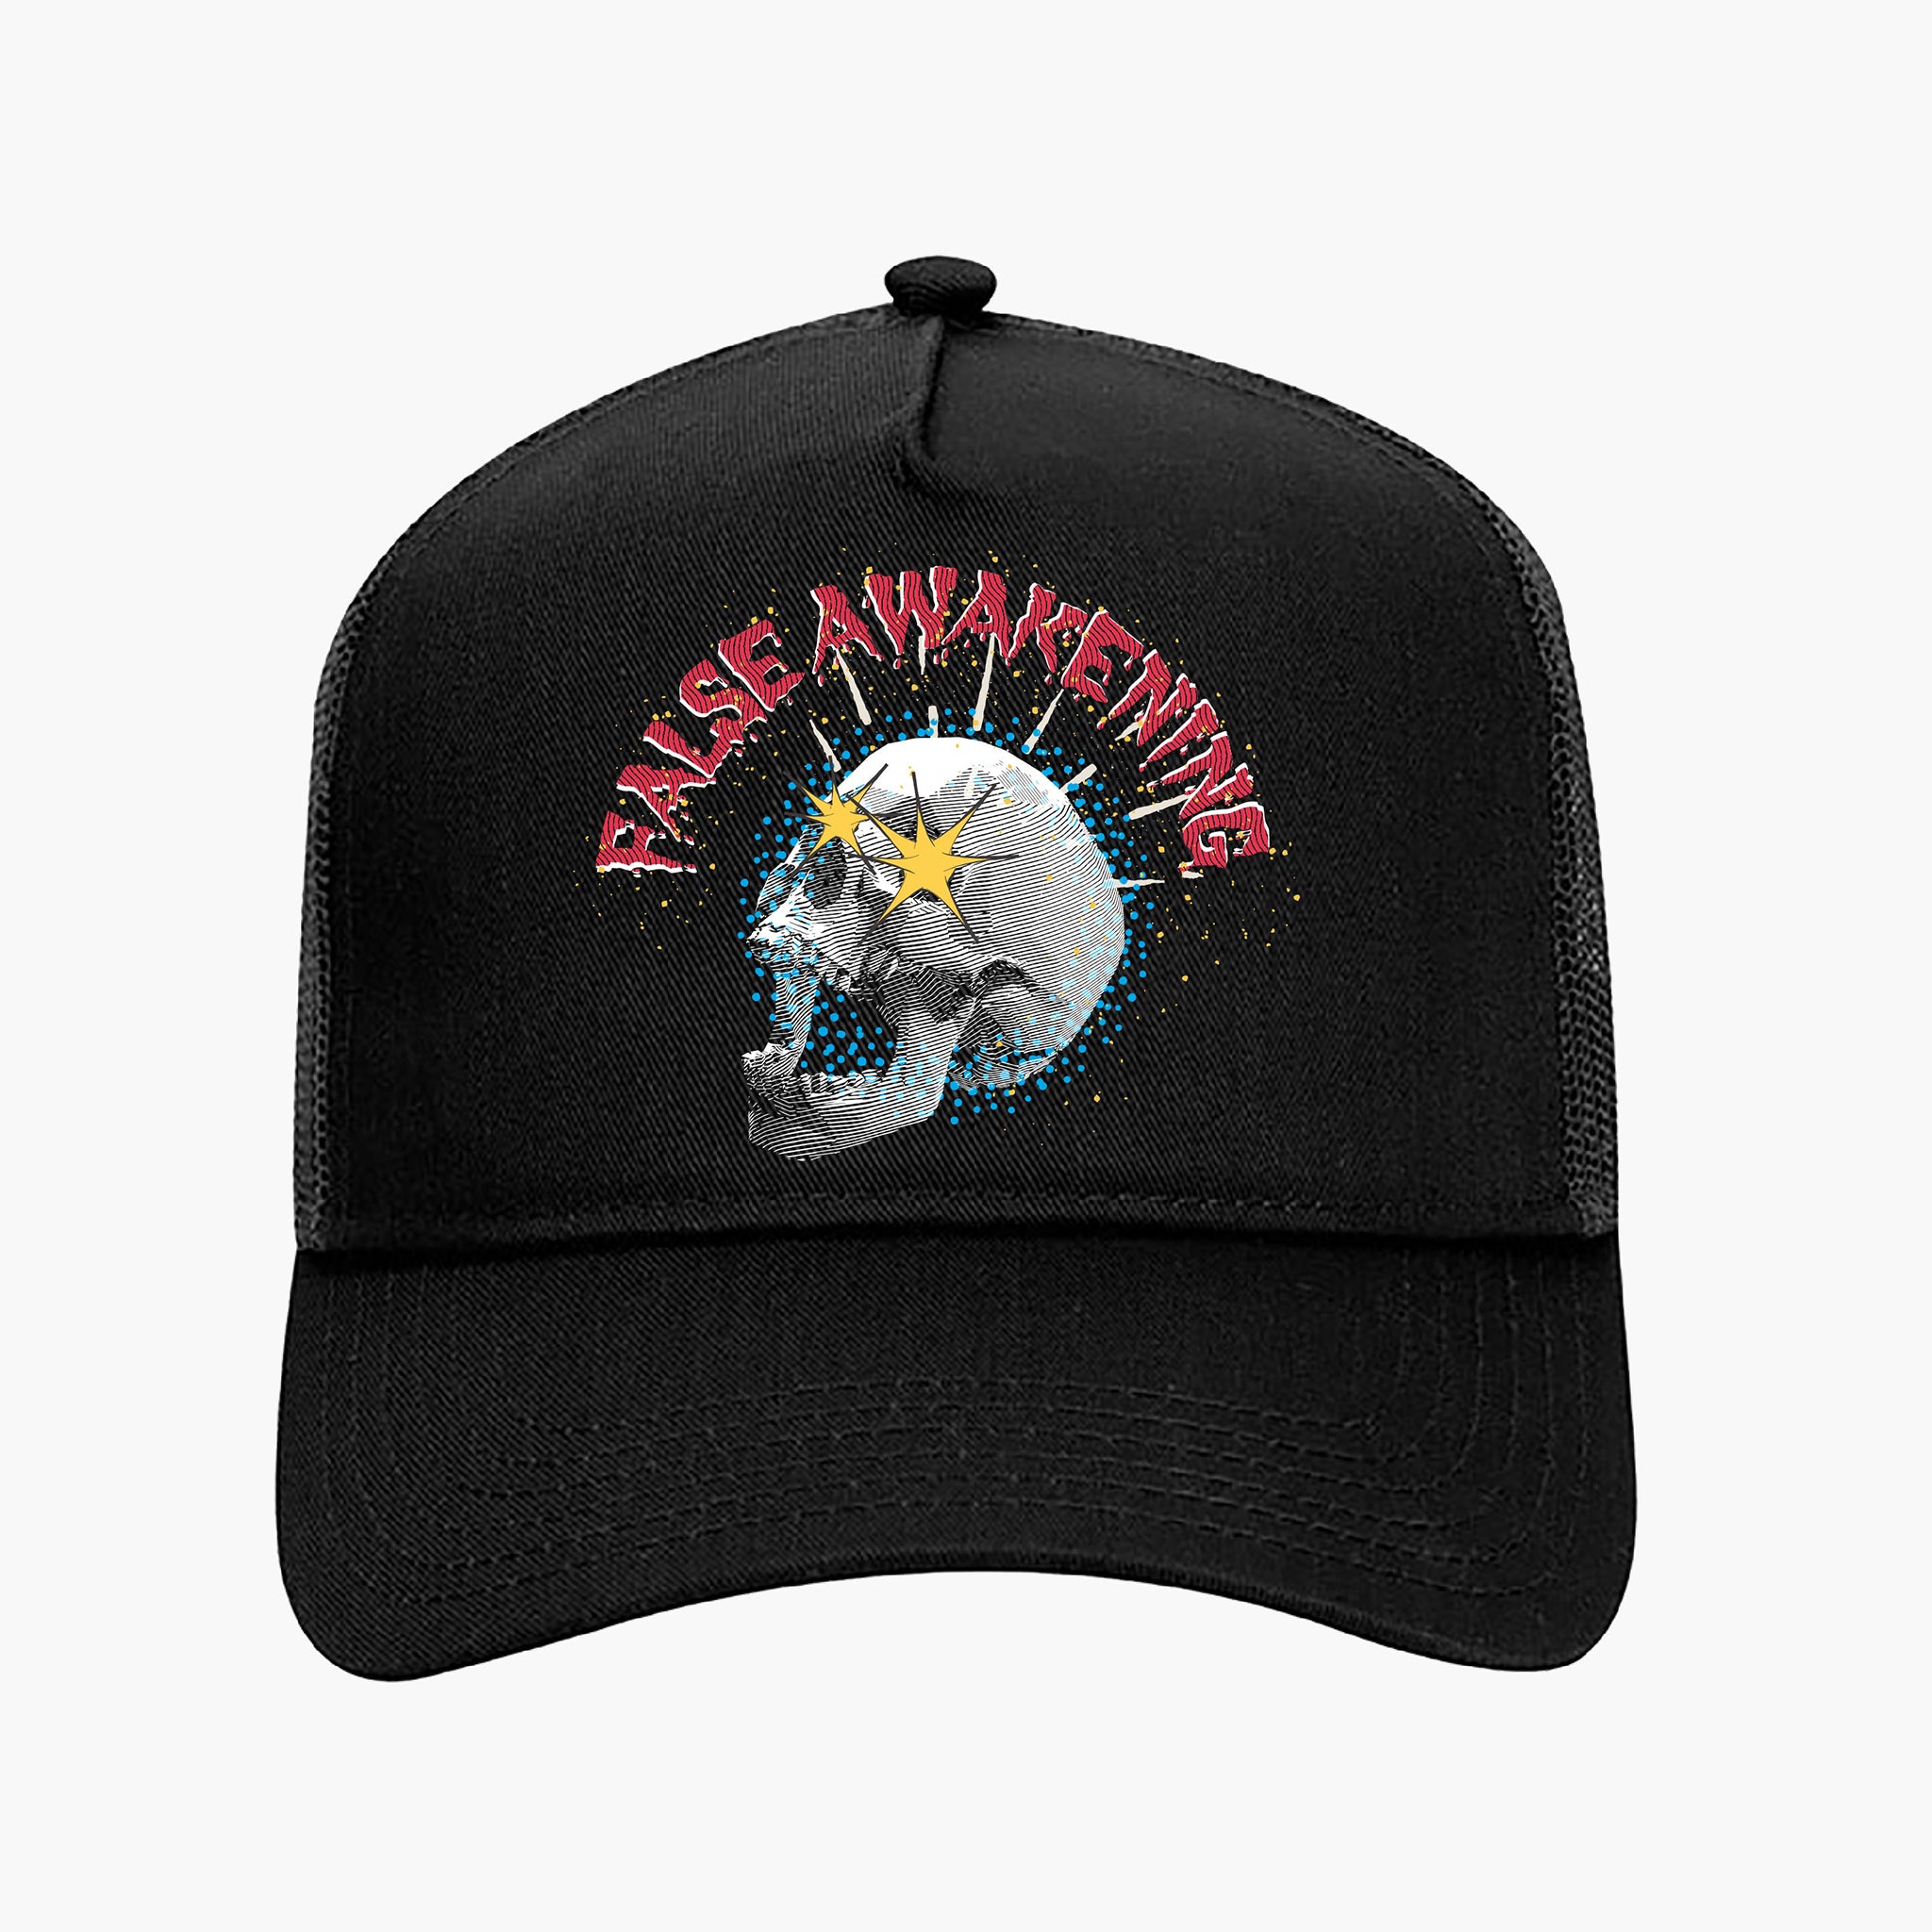 False Awakening Trucker Hat - Frequently Asked Questions